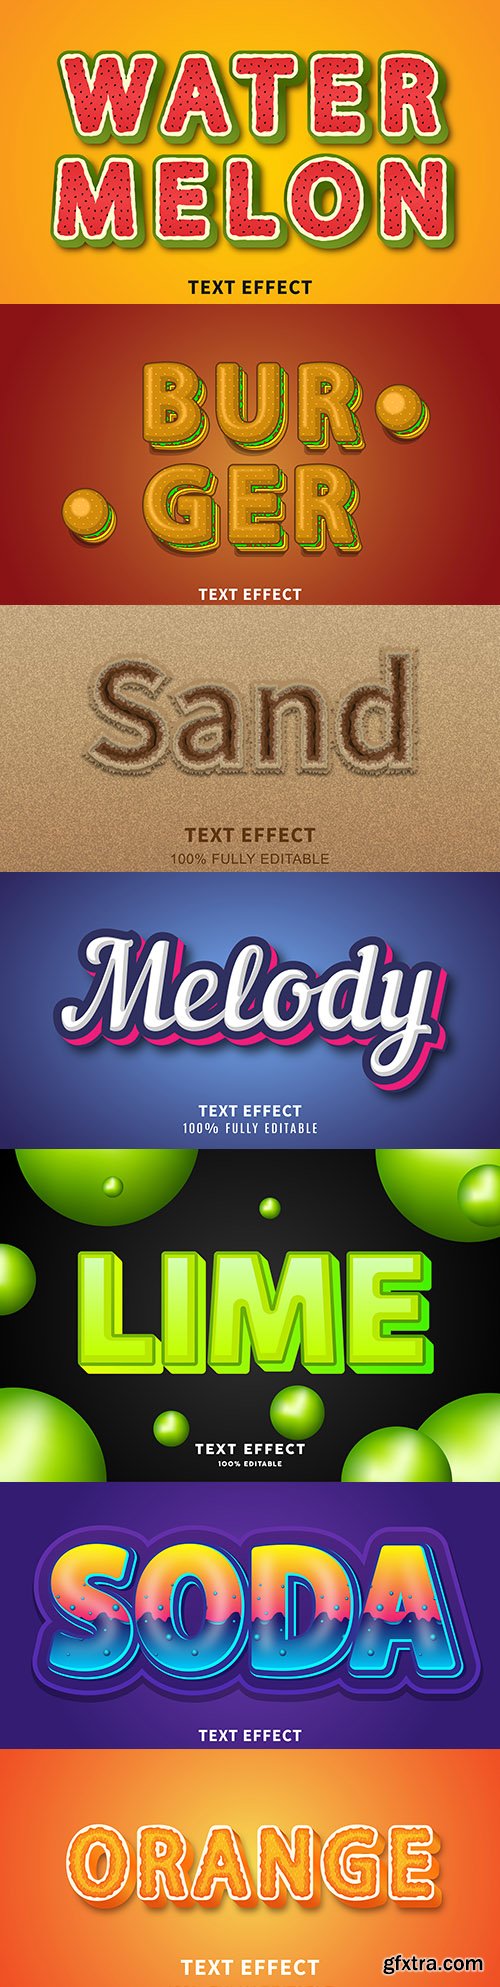 Editable font effect text collection illustration 31